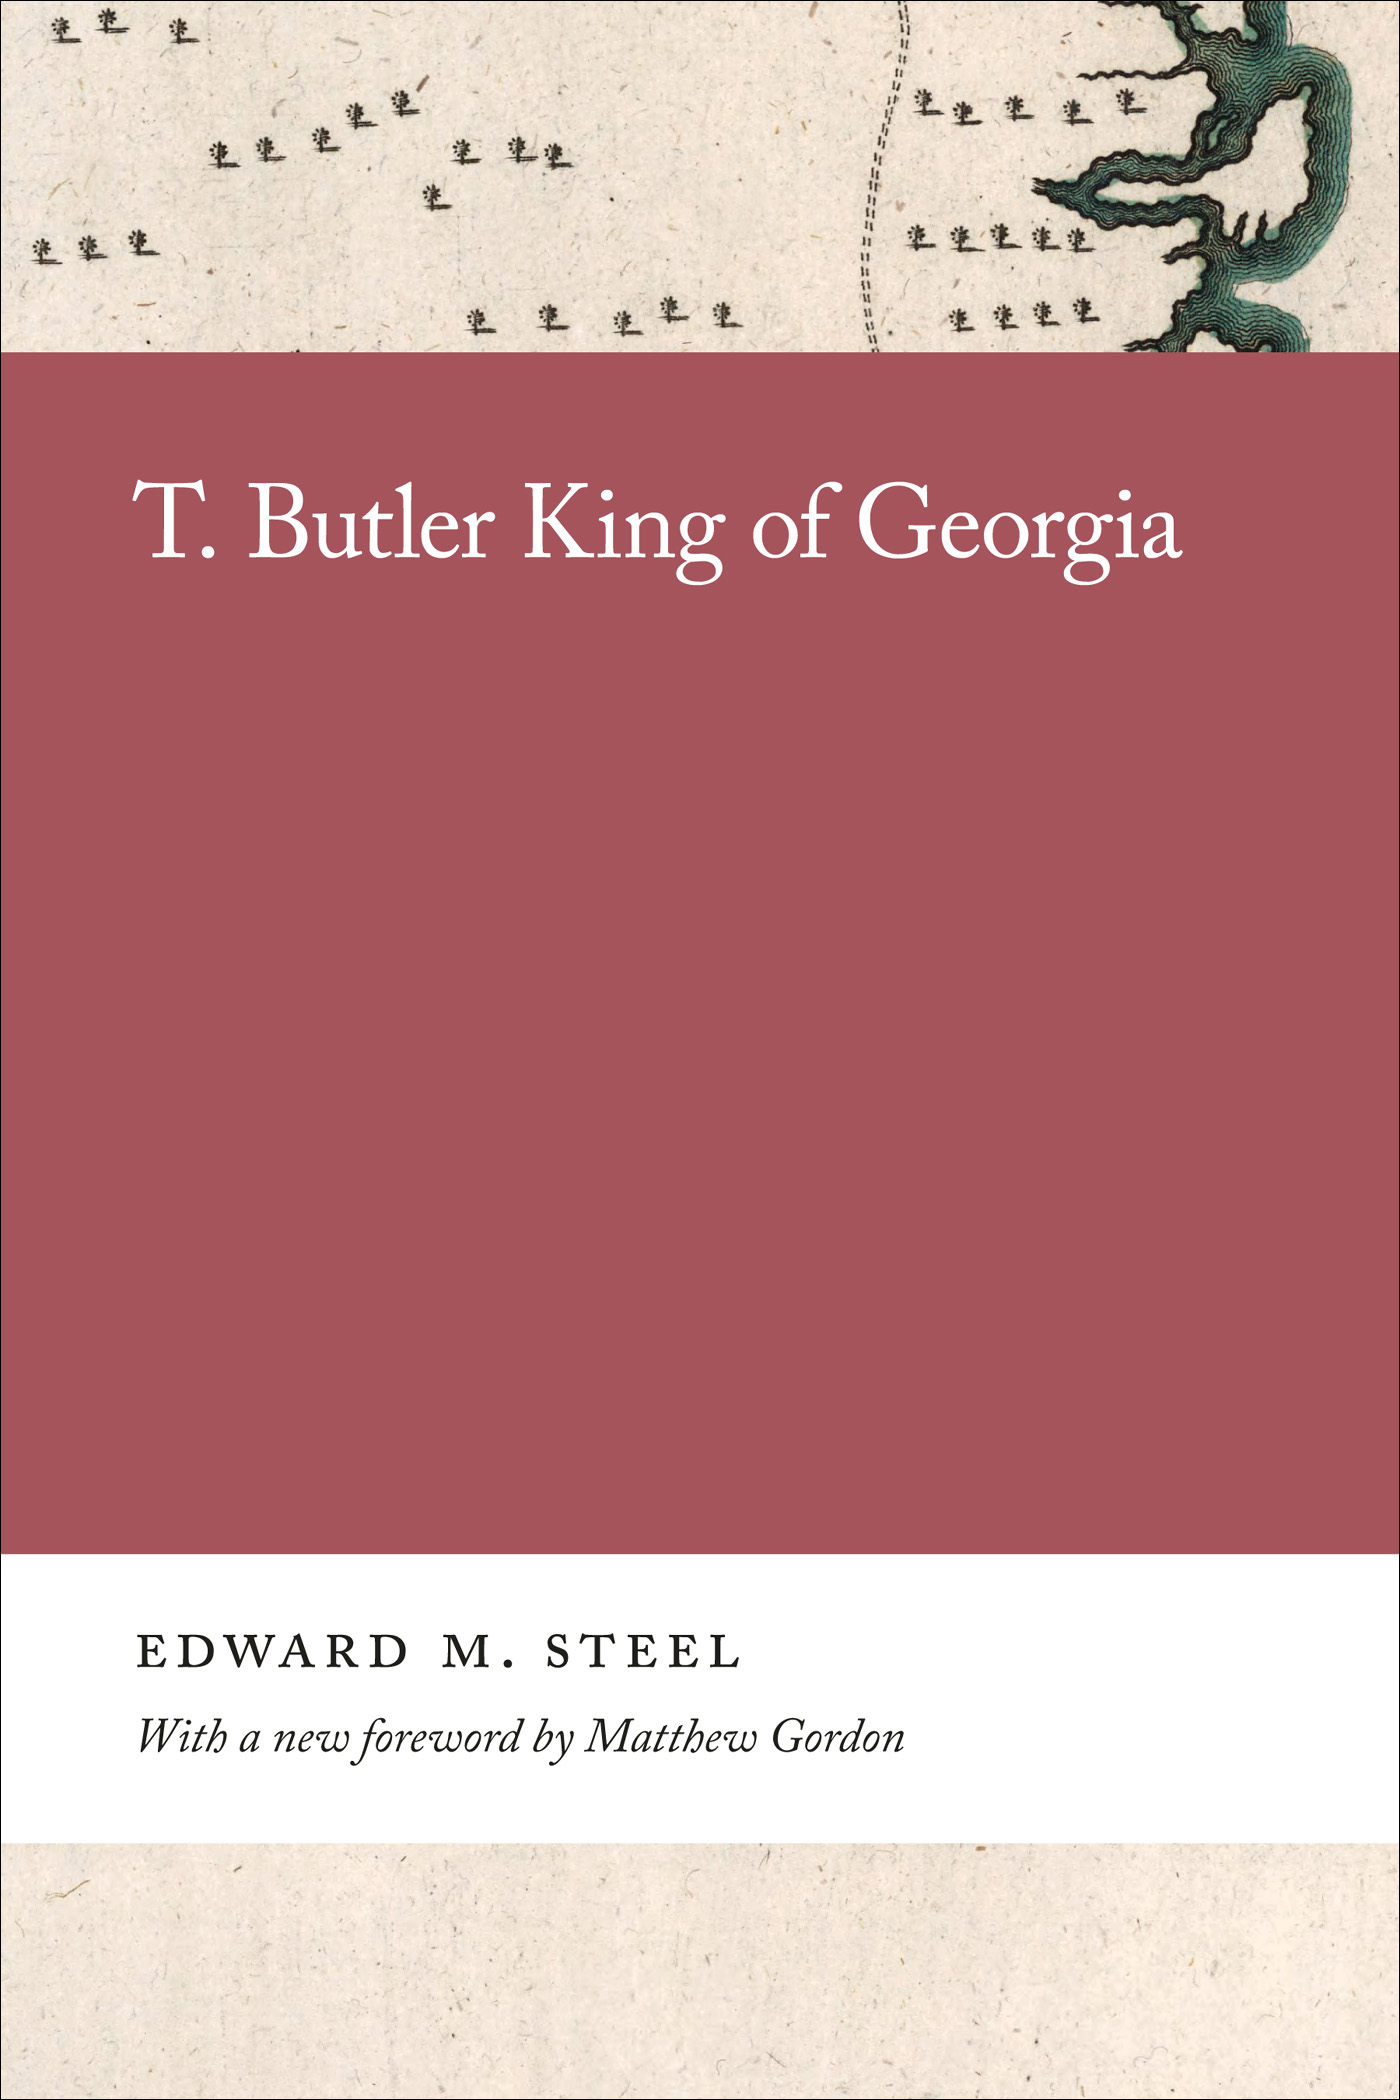 Coverpage of the book “T. Butler King of Georgie.”